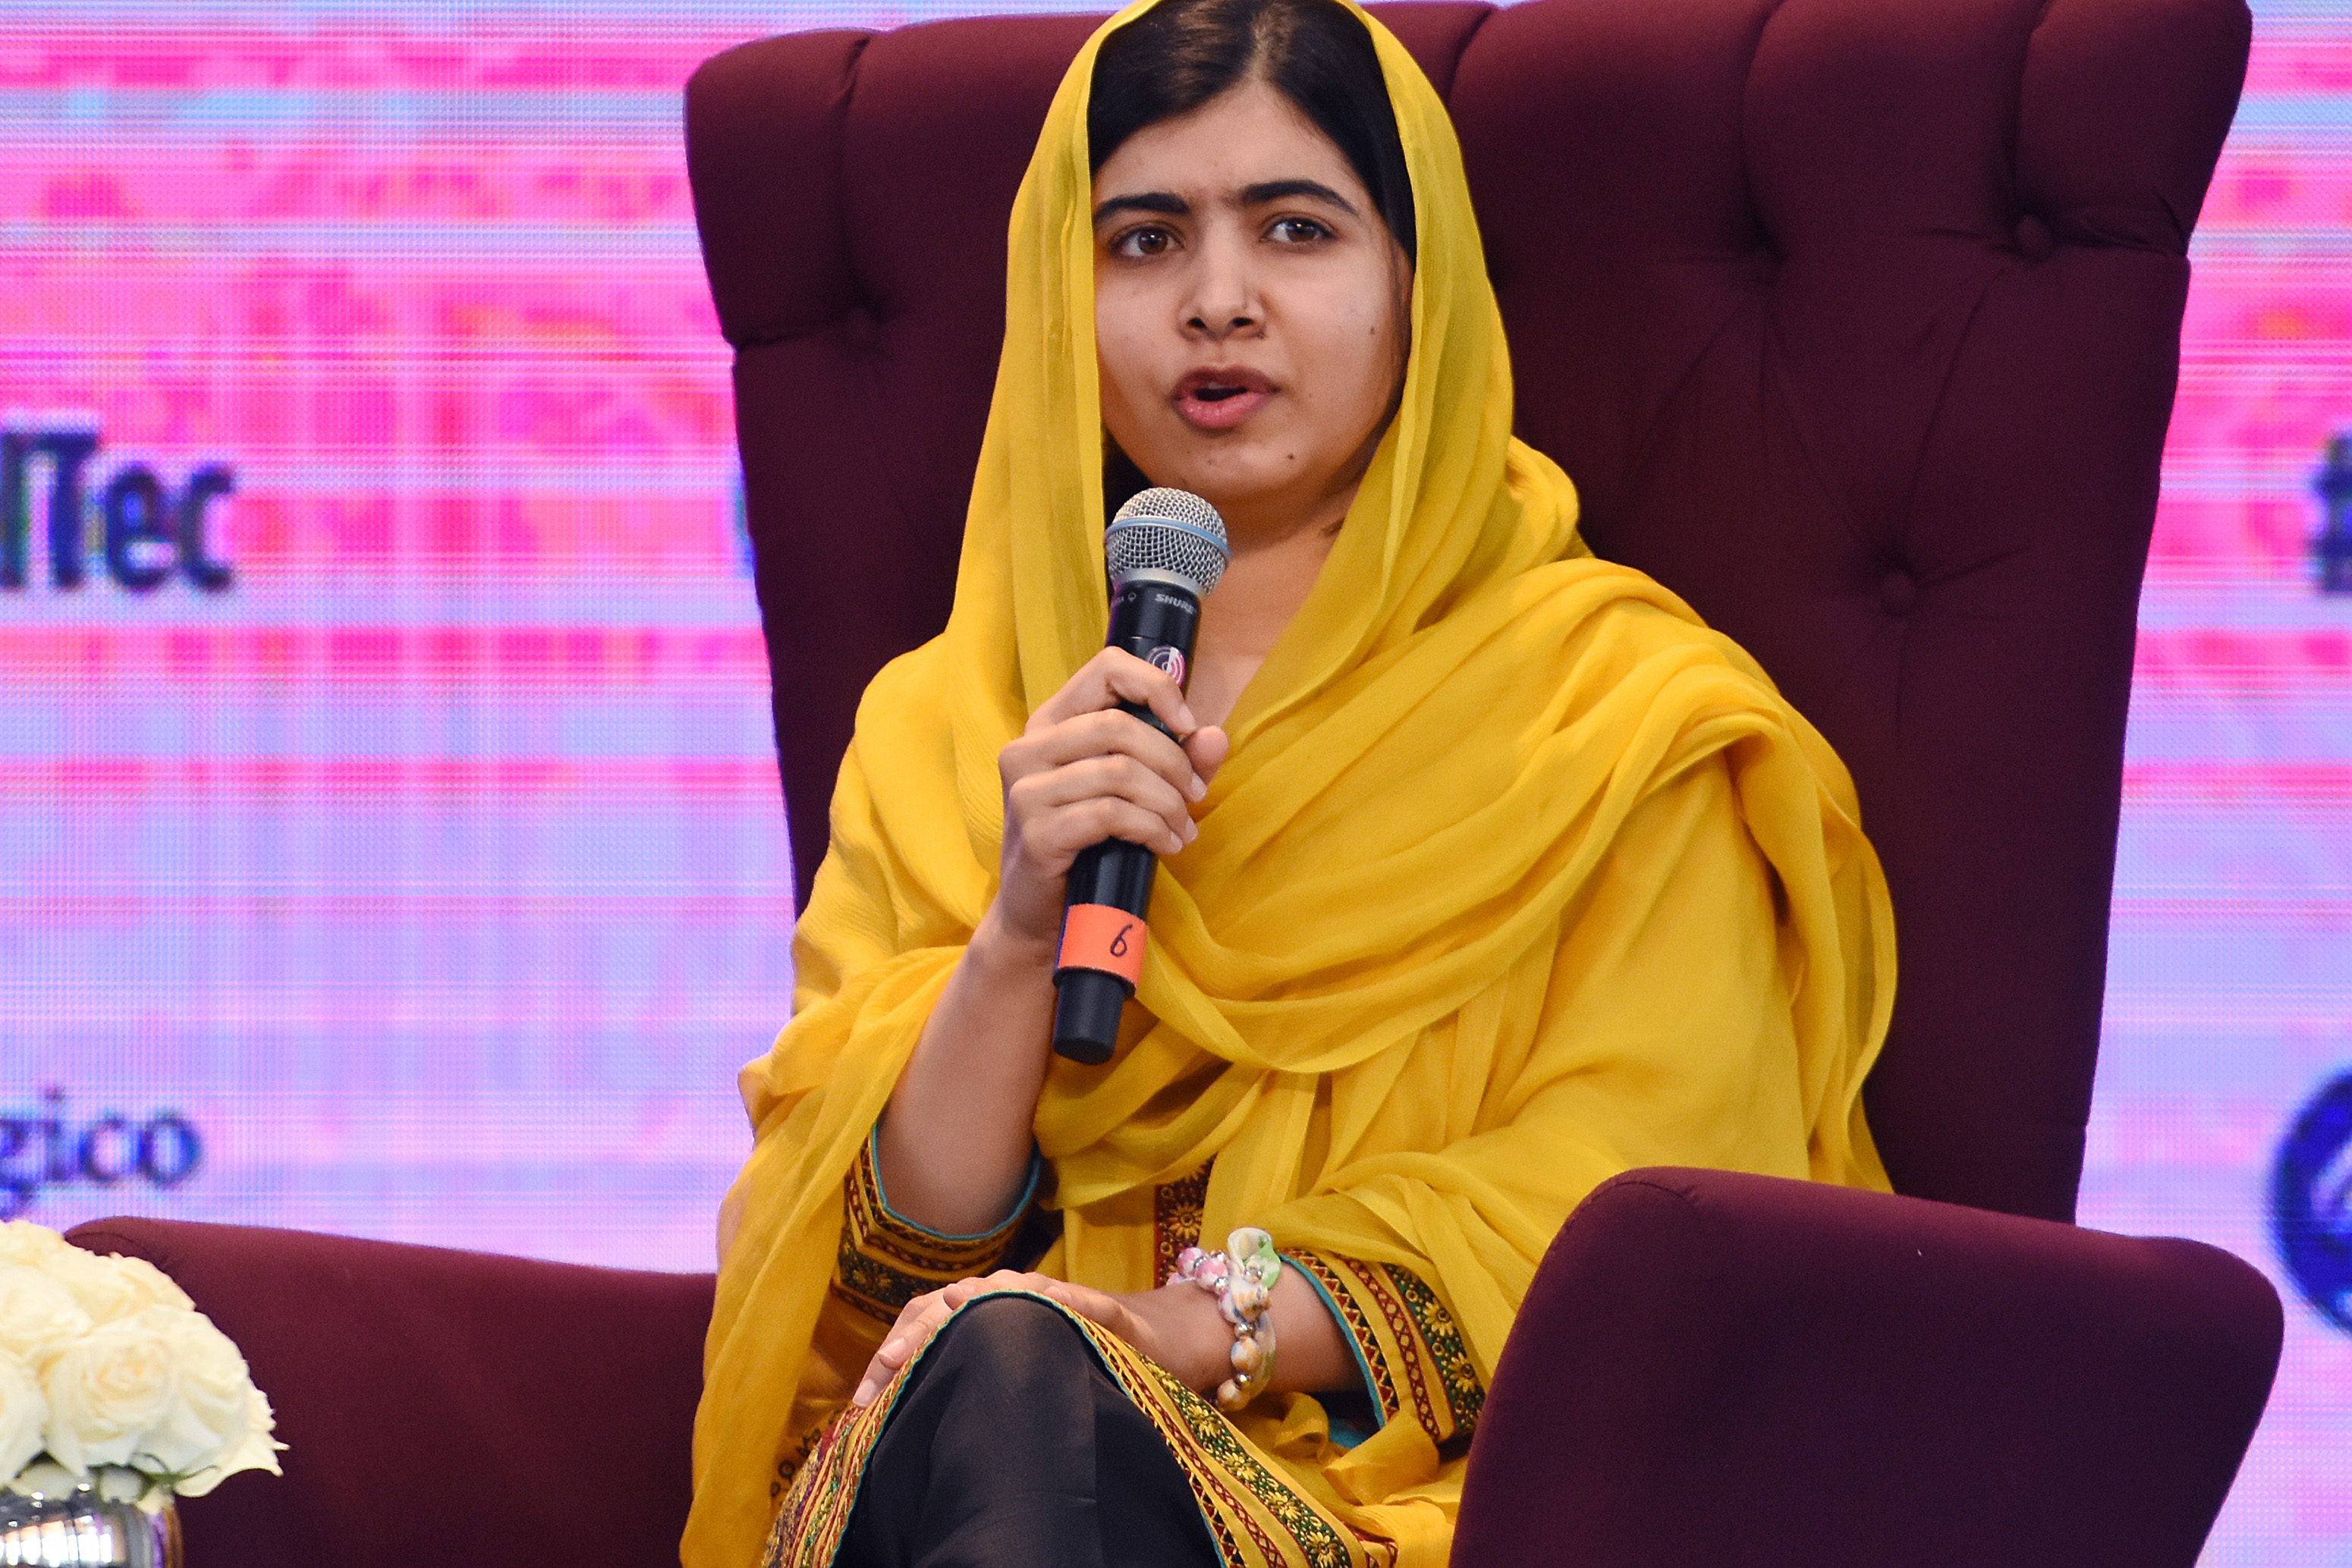 Education activist Malala Yousafzai speaks during a press conference at the Tecnologico de Monterrey University on Aug. 31, 2017 in Mexico City, Mexico. (Carlos Tischler—NurPhoto/Getty Images)